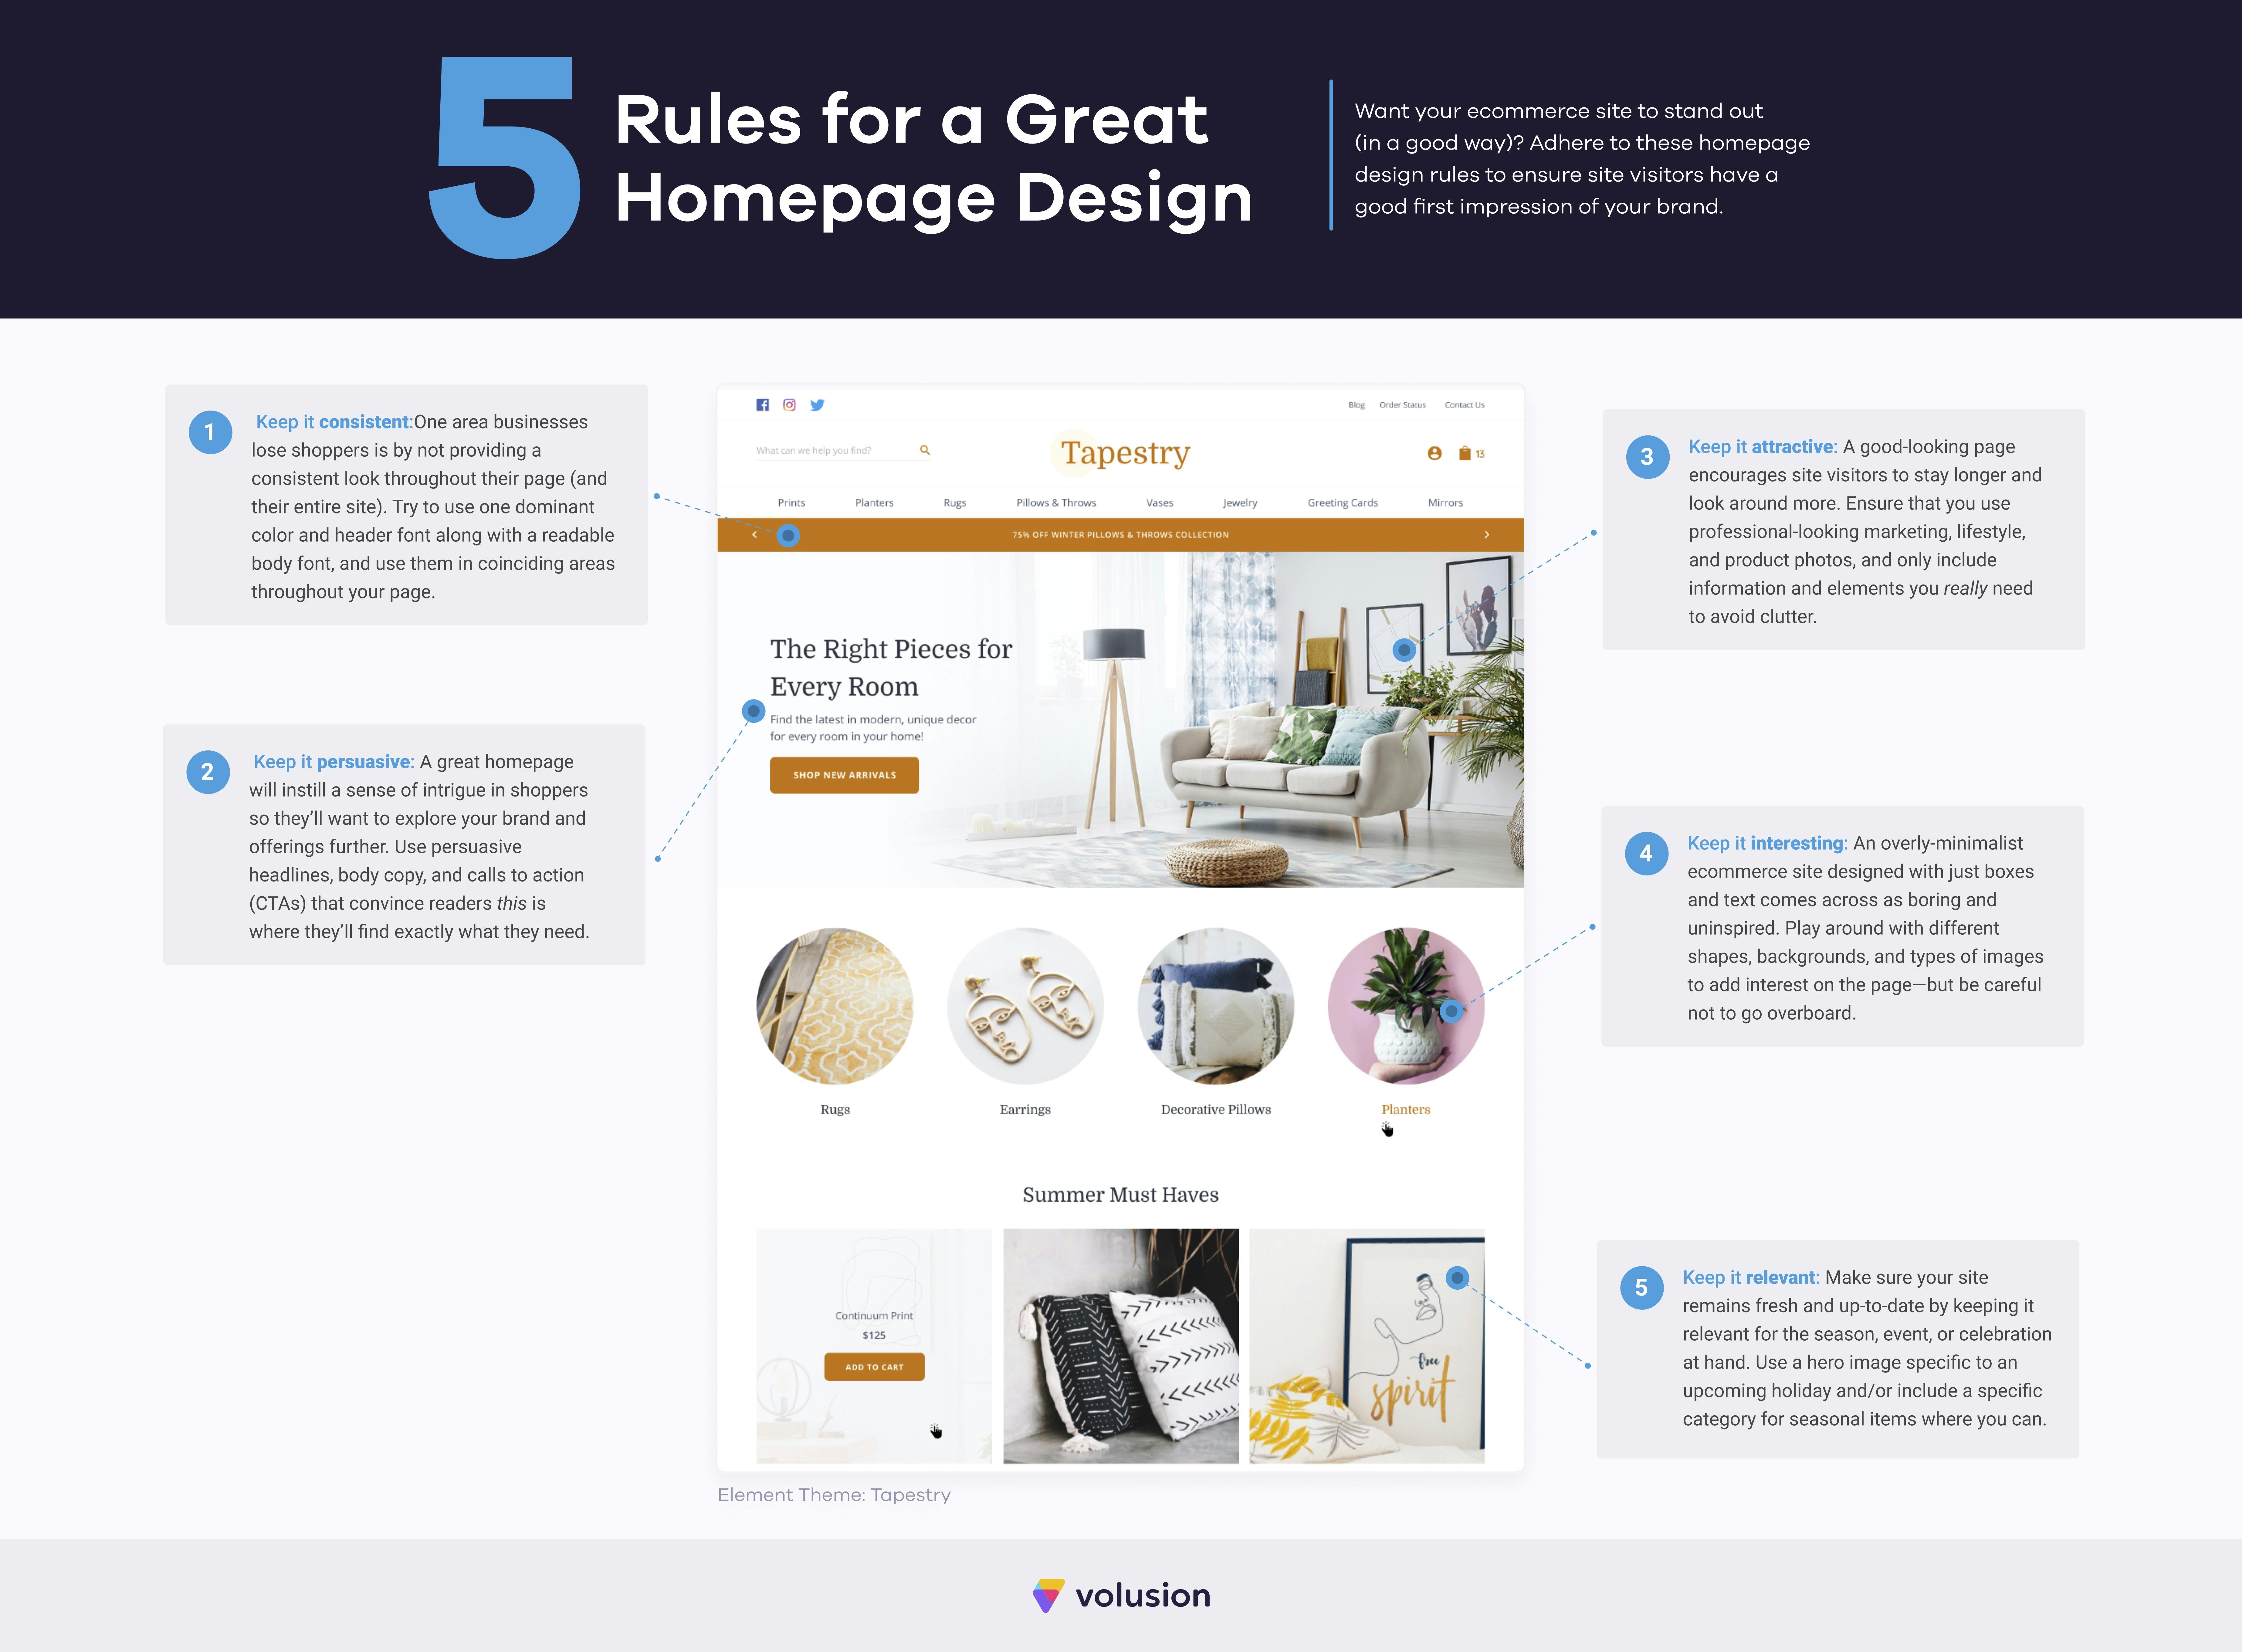 5 Rules for a Great Homepage Design